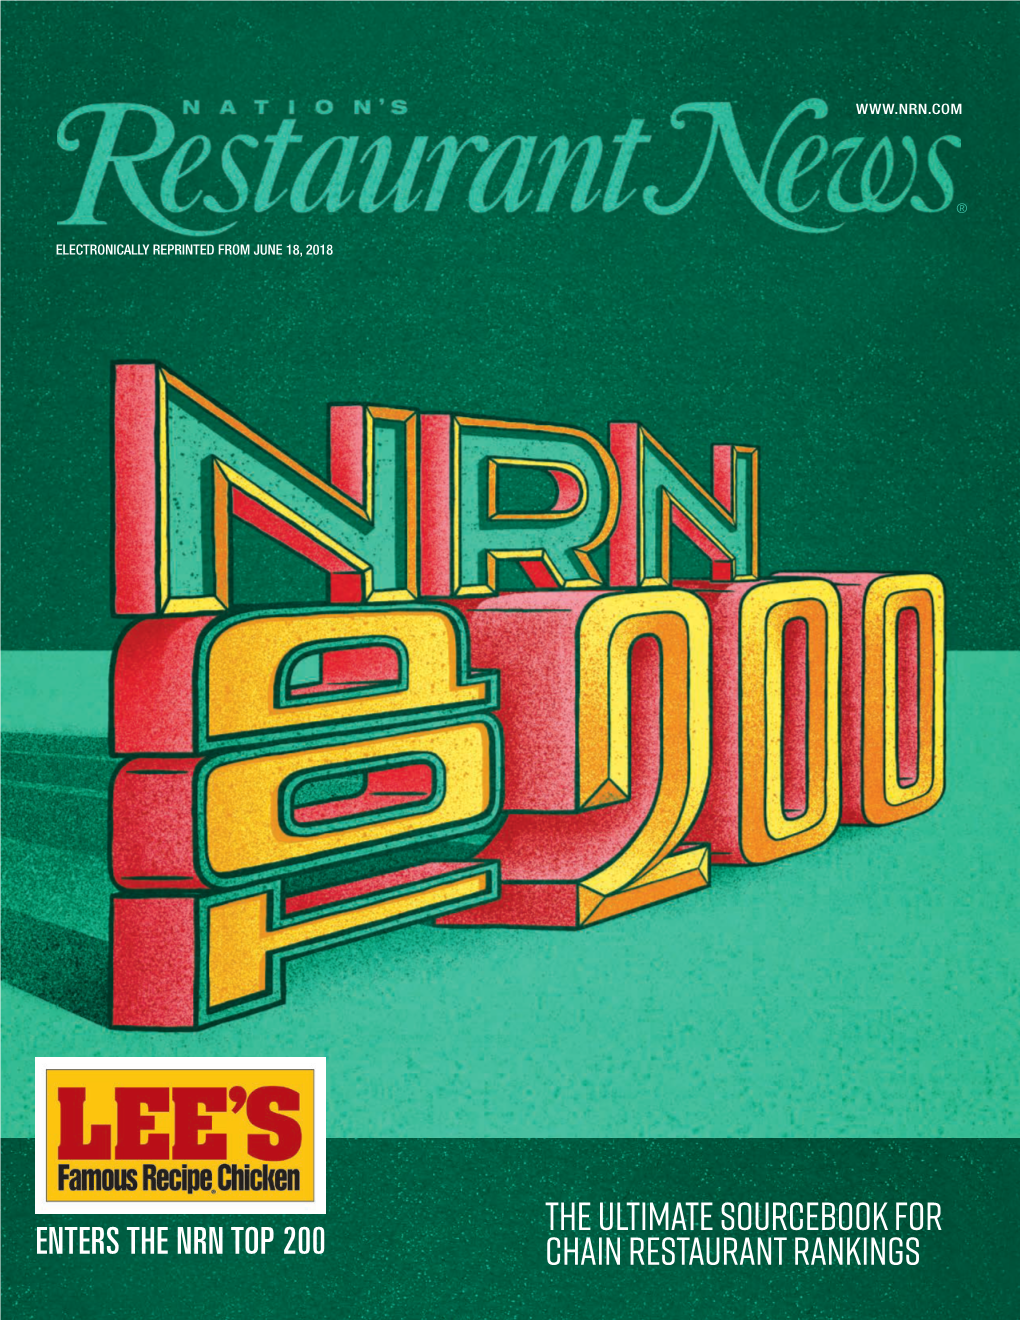 Lee's Famous Recipe Chicken Enters the NRN Top